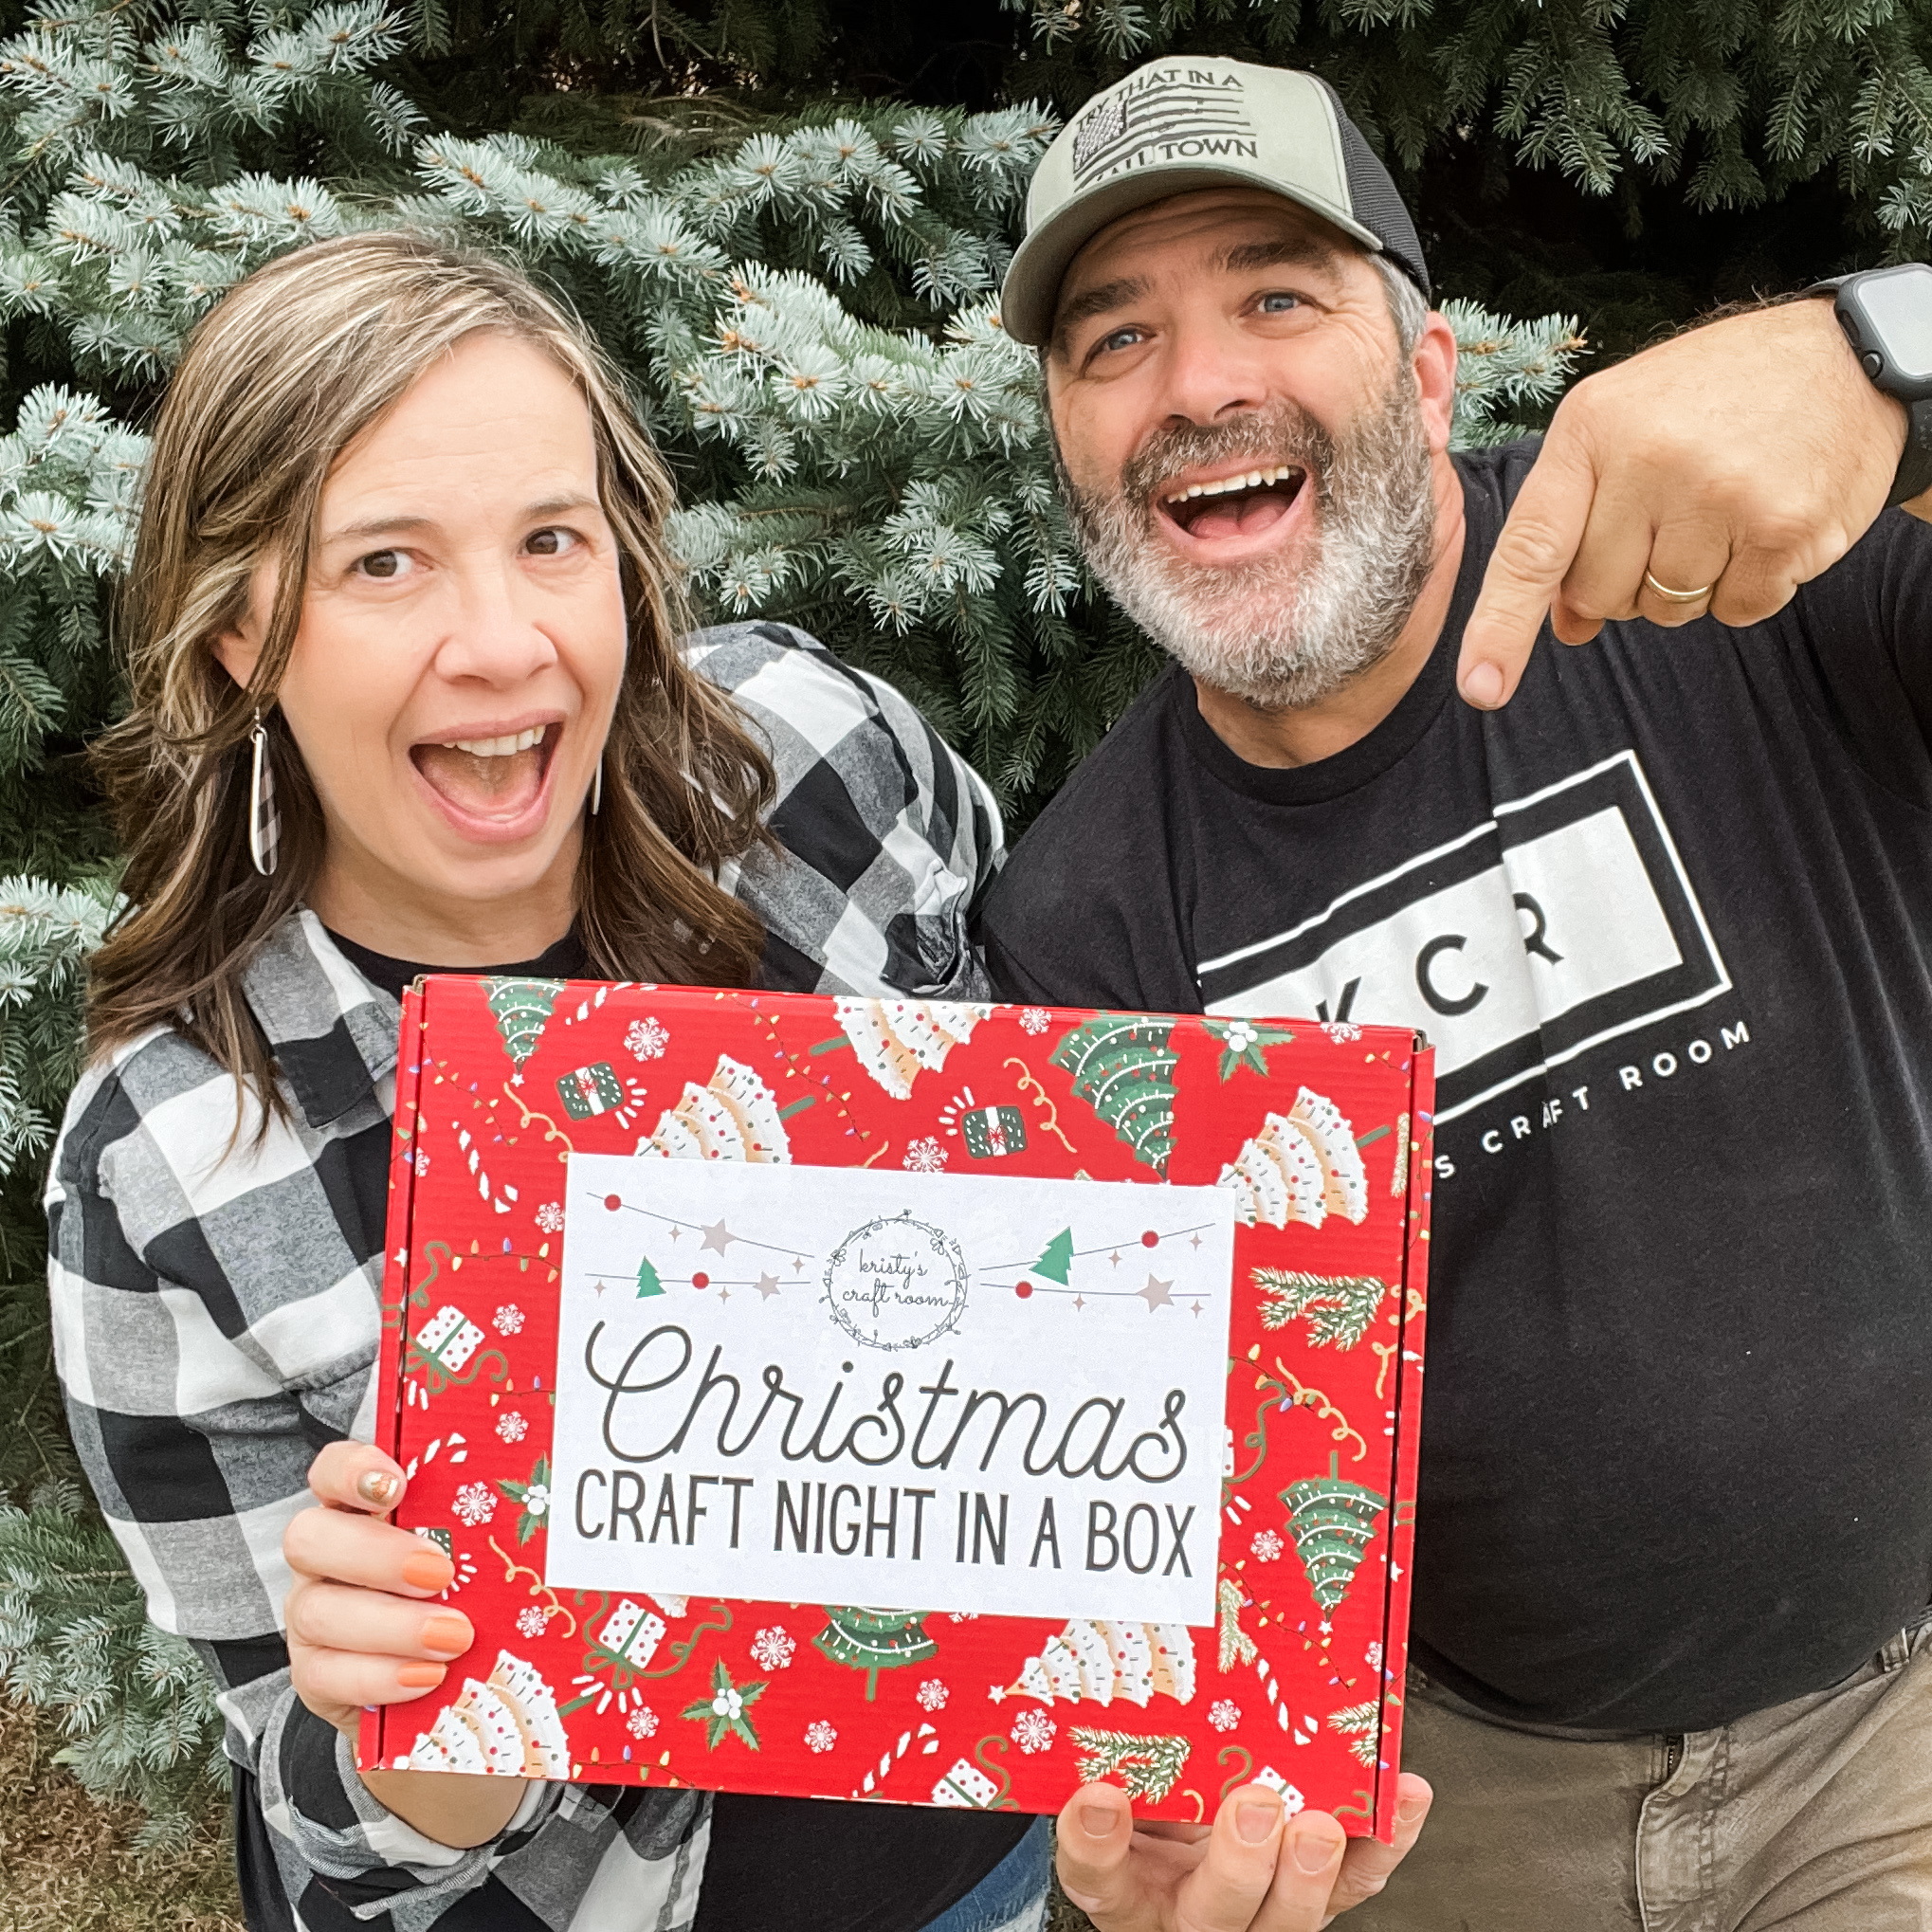 Family and friends Christmas craft night shipped to your door. diy wood cutouts for gathering and crafting.